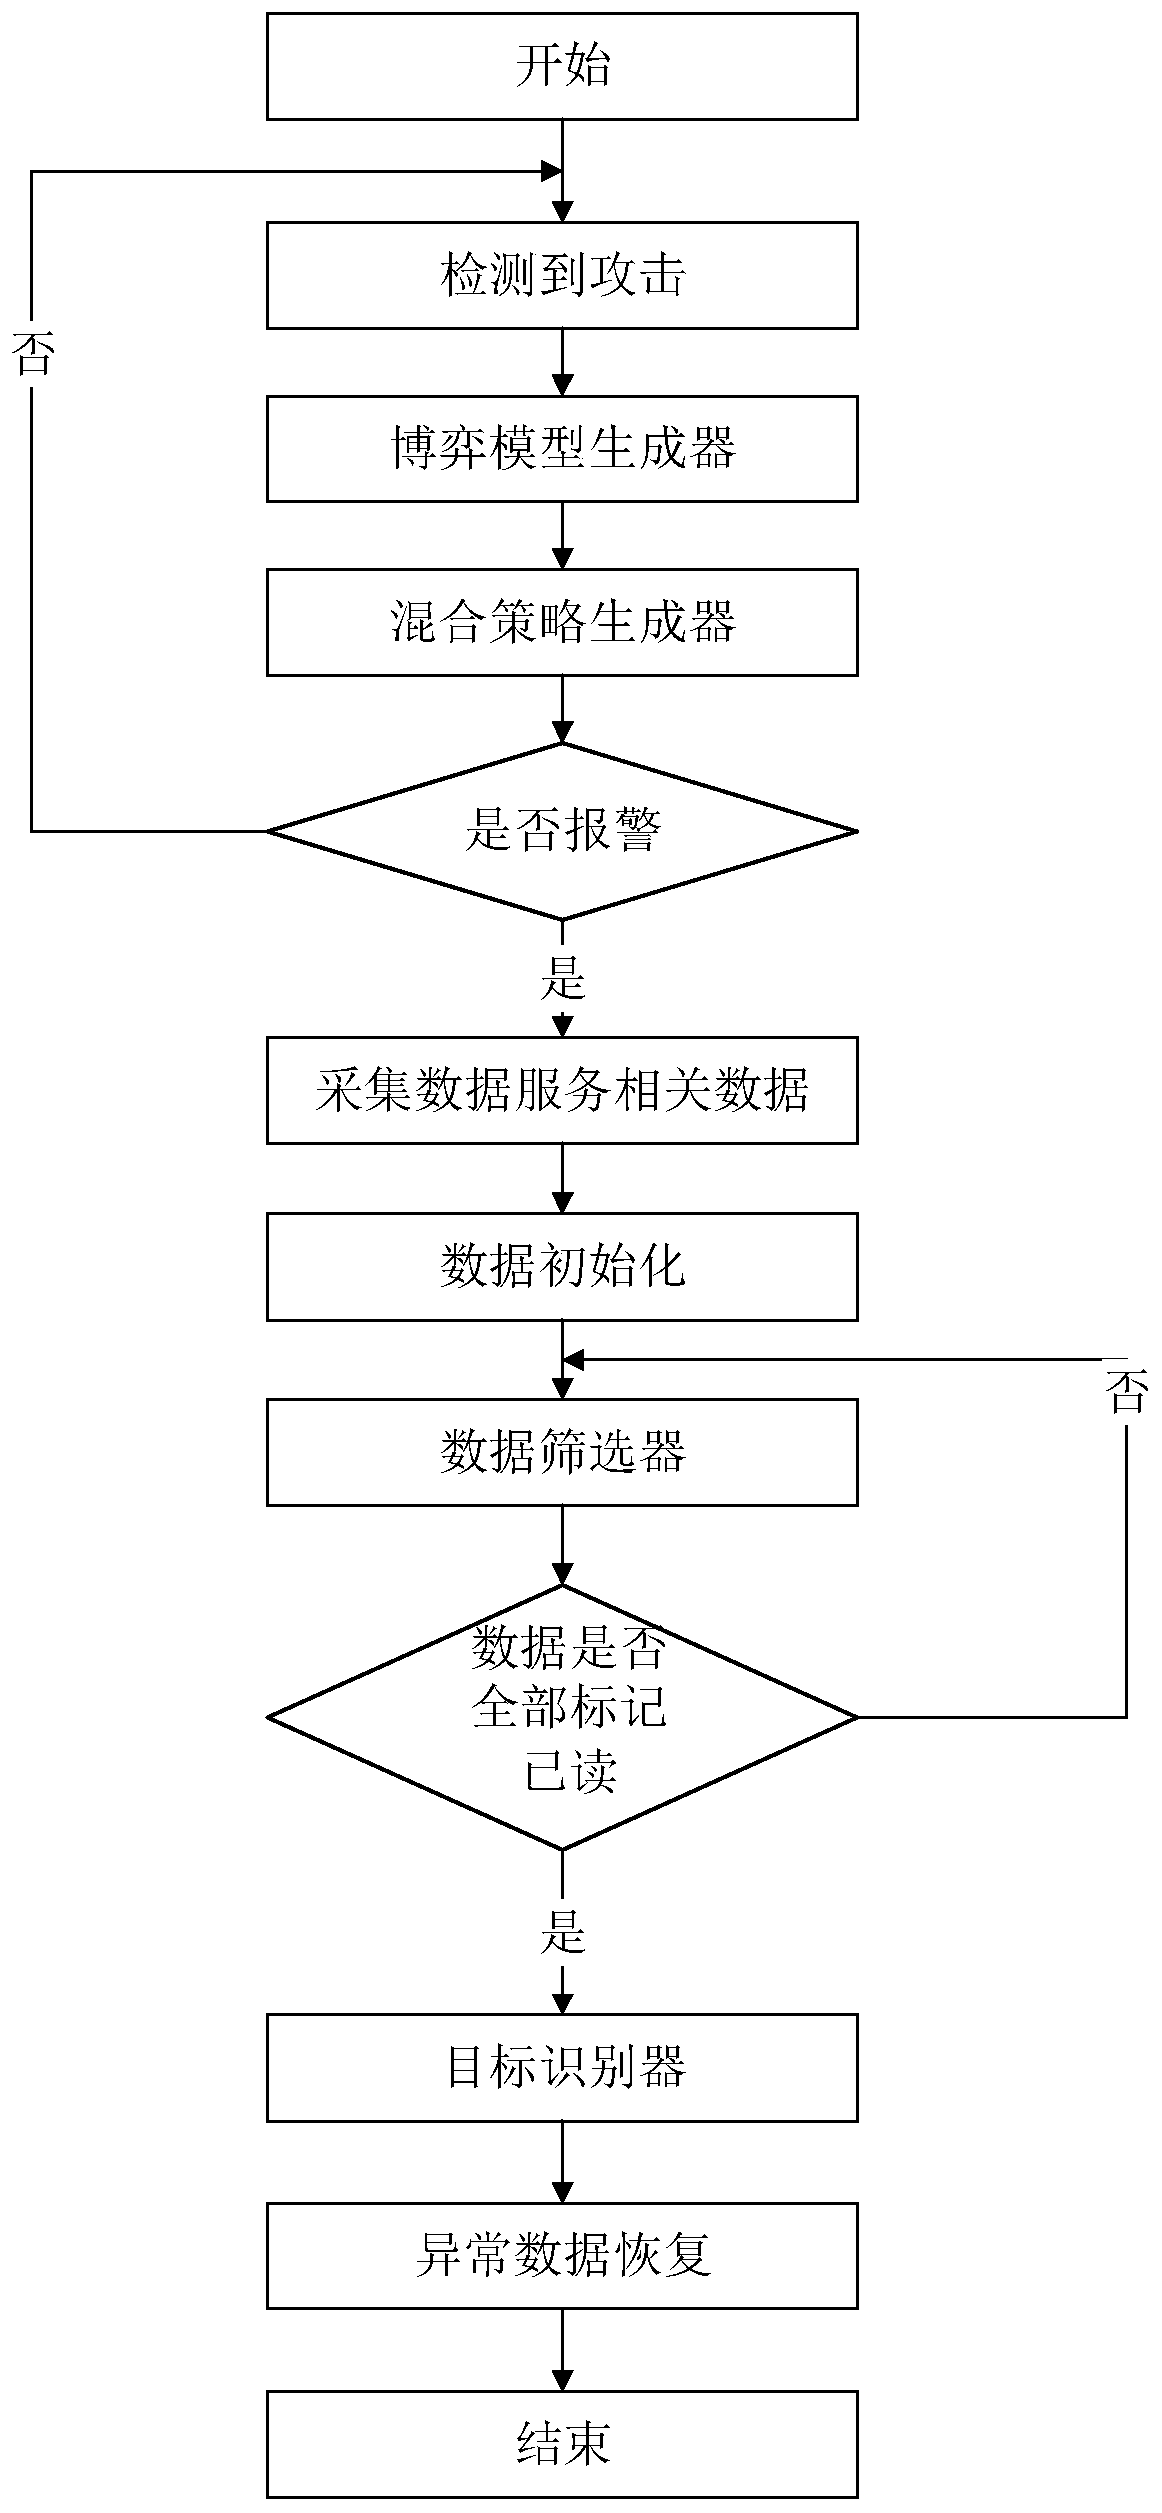 Data service-oriented adaptive intrusion response game method and system thereof